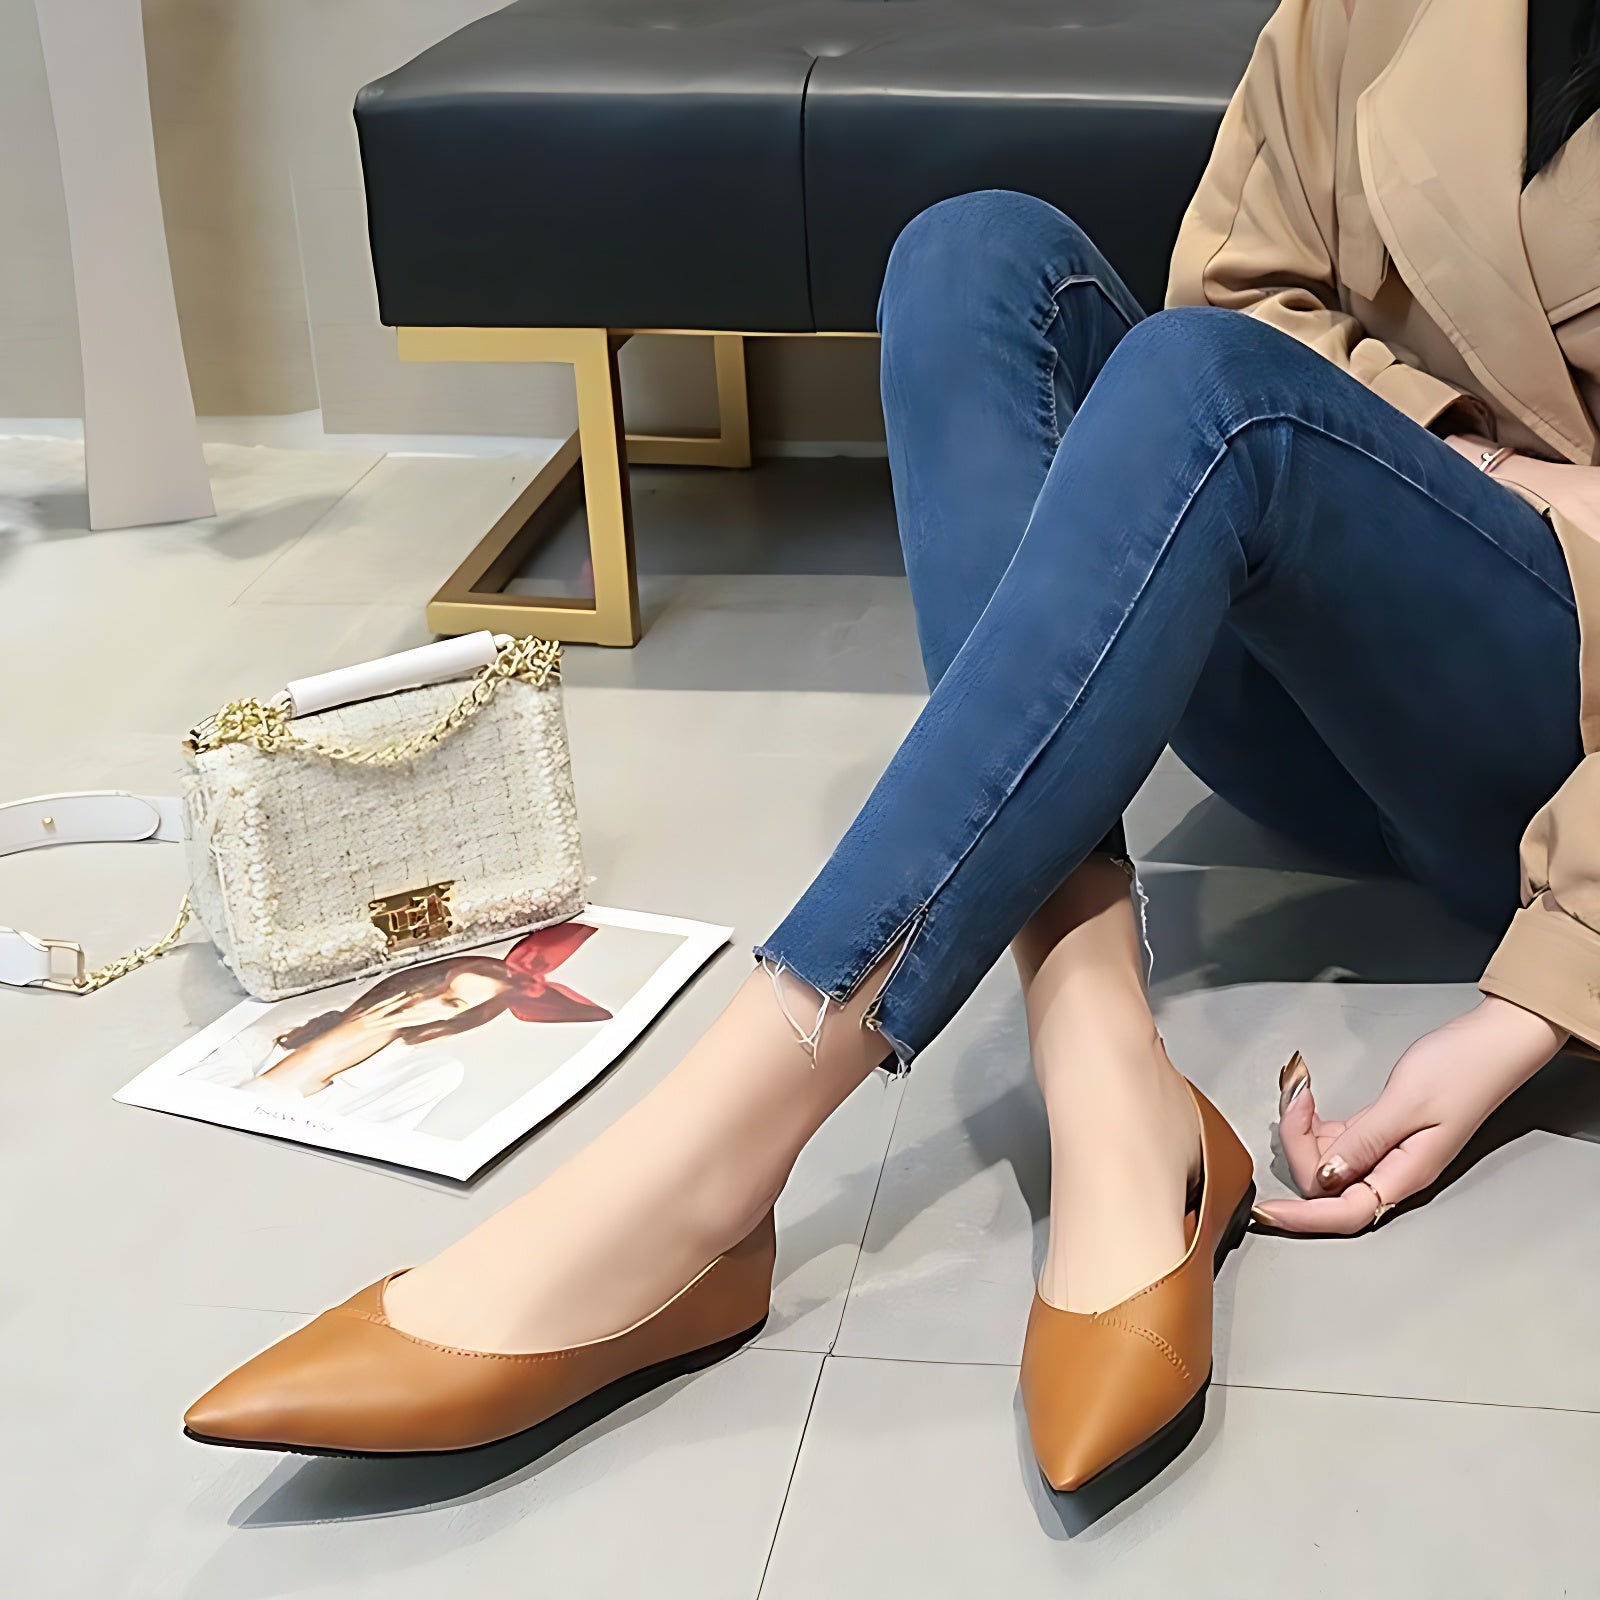 Women's Casual Shoes 2021 Soft PU Leather Ballet Flats Pointed Toe Shallow Mouth Slip-on Ladies Loafer - Touchy Style .